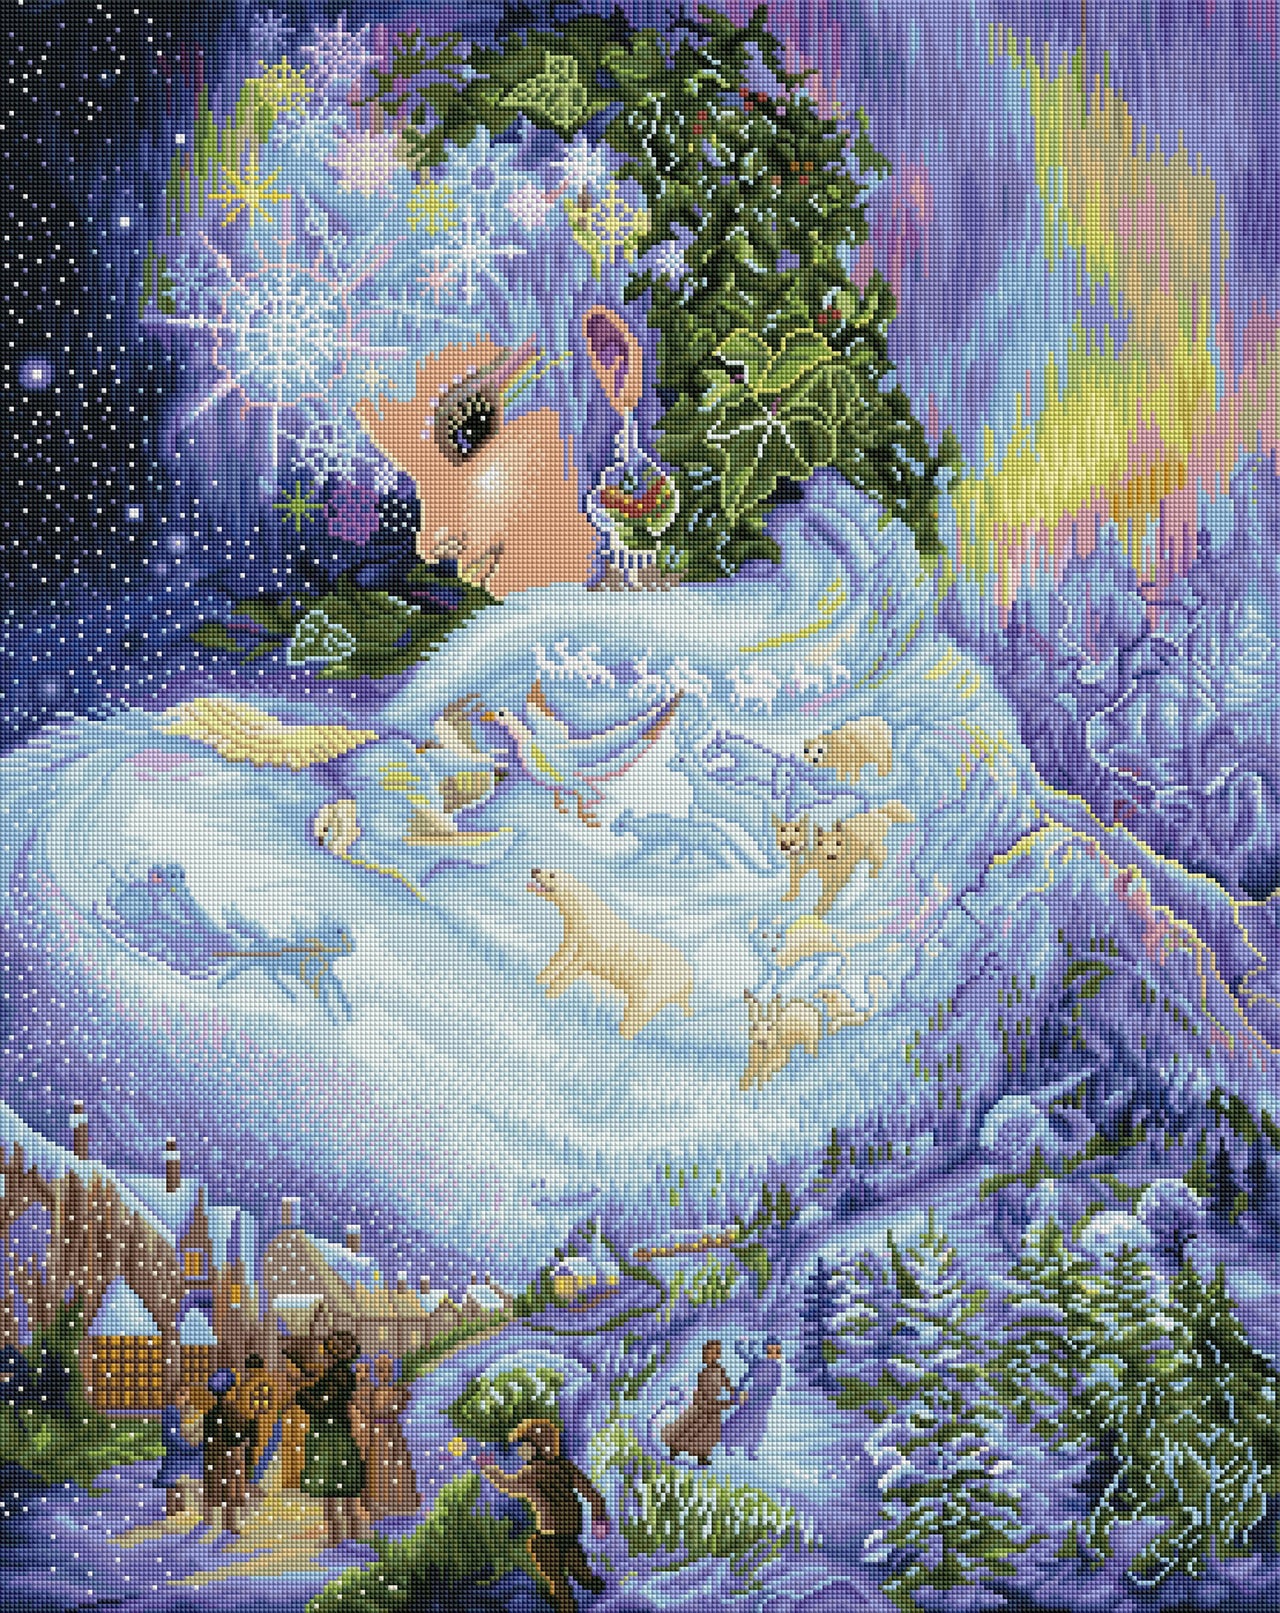 Diamond Painting Snow Queen 27.6" x 34.6″ (70cm x 88cm) / Square with 62 Colors including 4 ABs